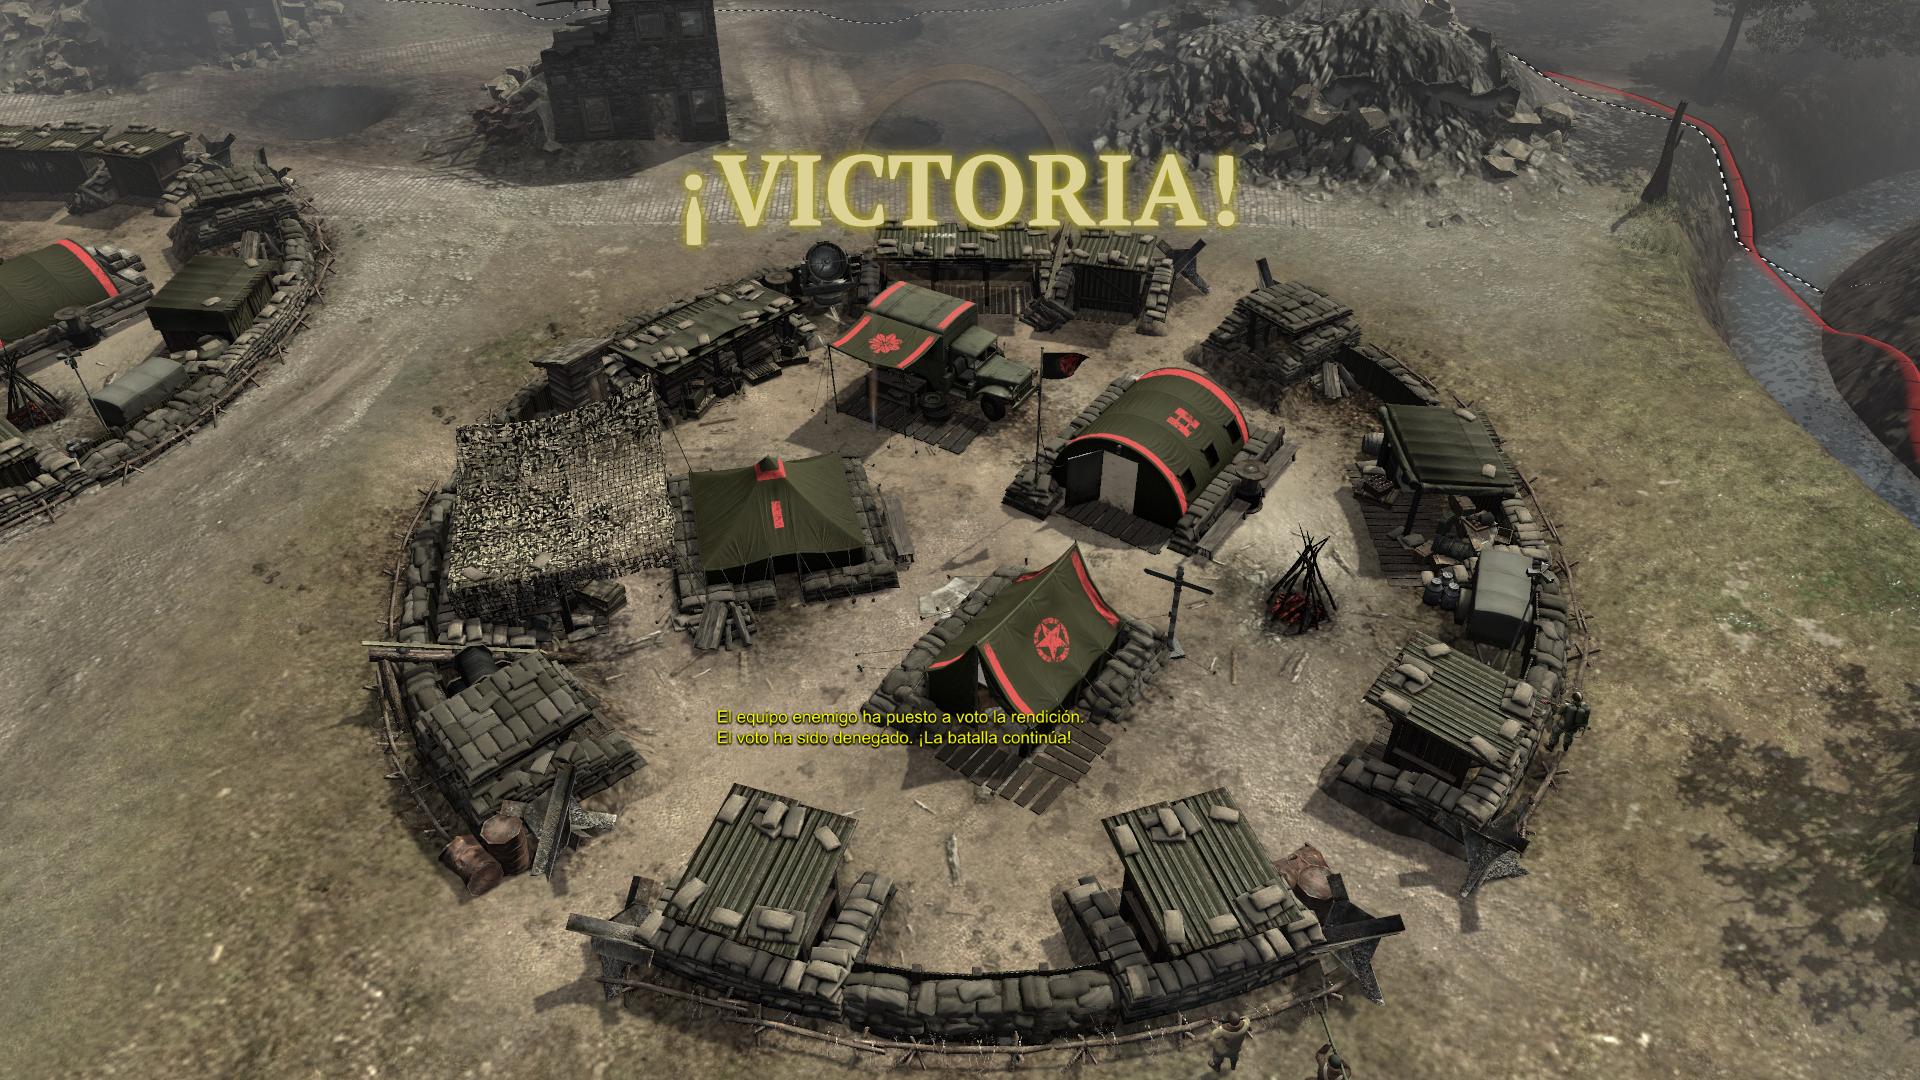 how to rotate camera company of heroes 2